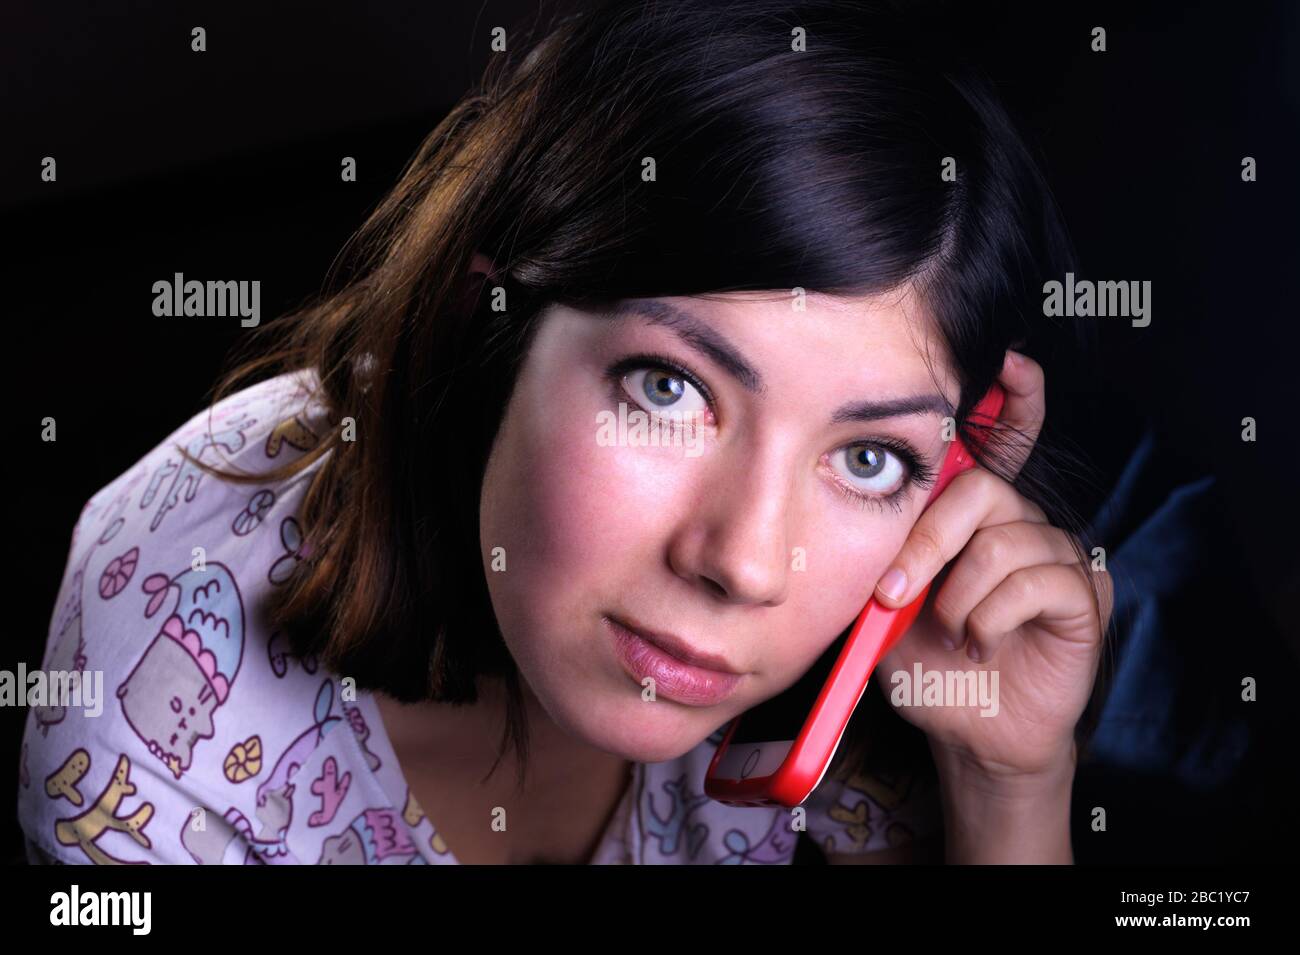 cute young woman with black hair and green eyes talking on a cell phone in a red case Stock Photo